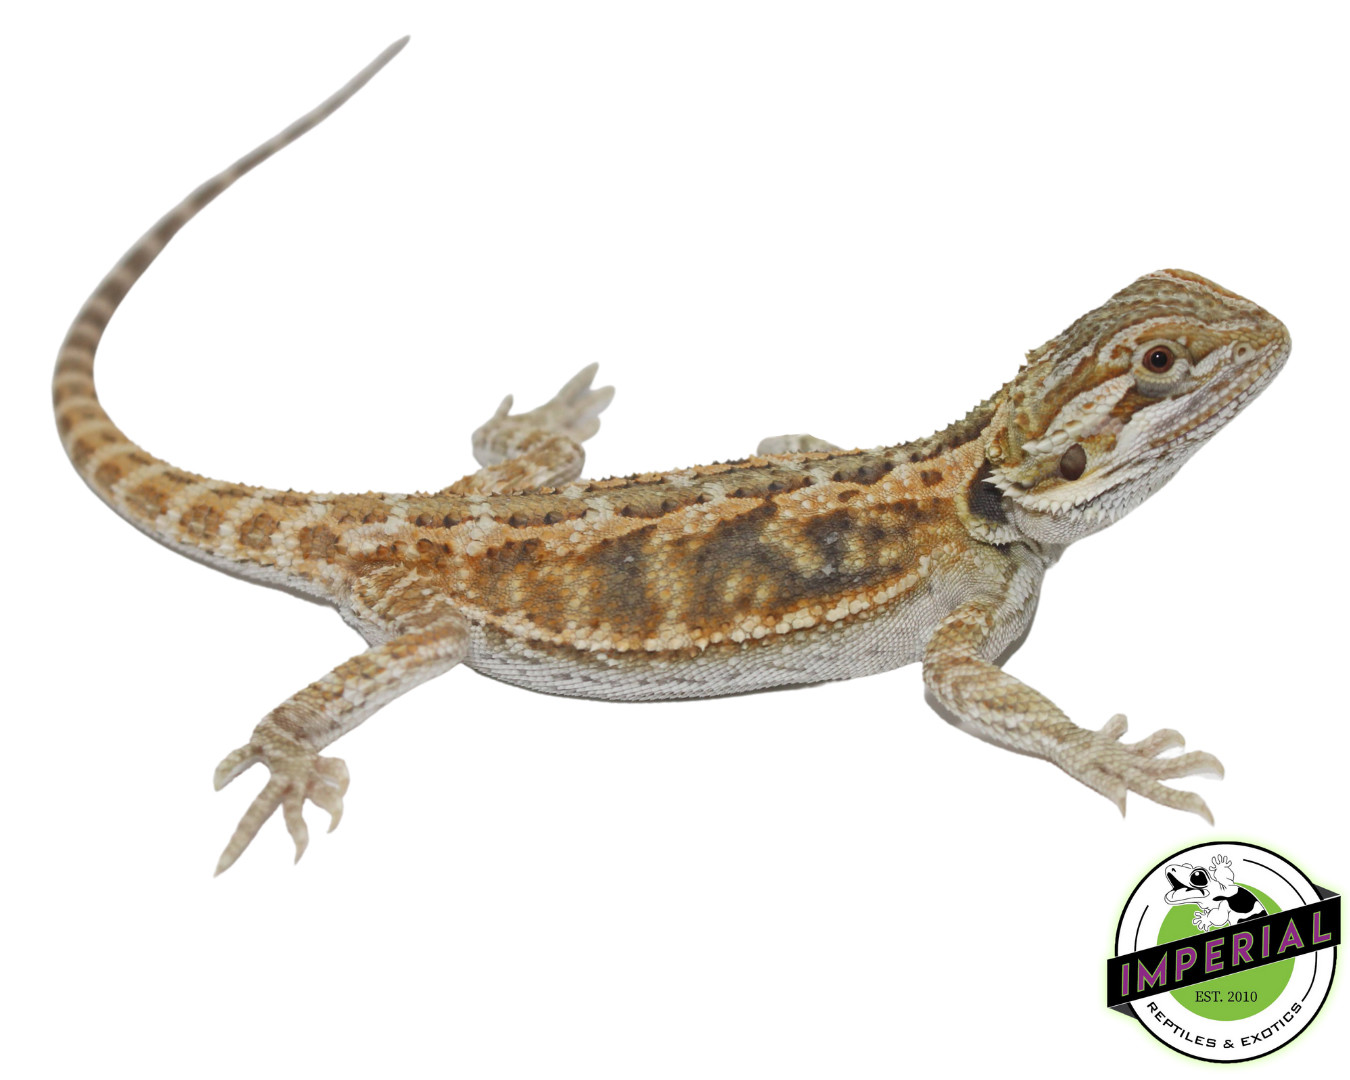 Citrus Central Bearded Dragon by Imperial Reptiles & Exotics, LLC